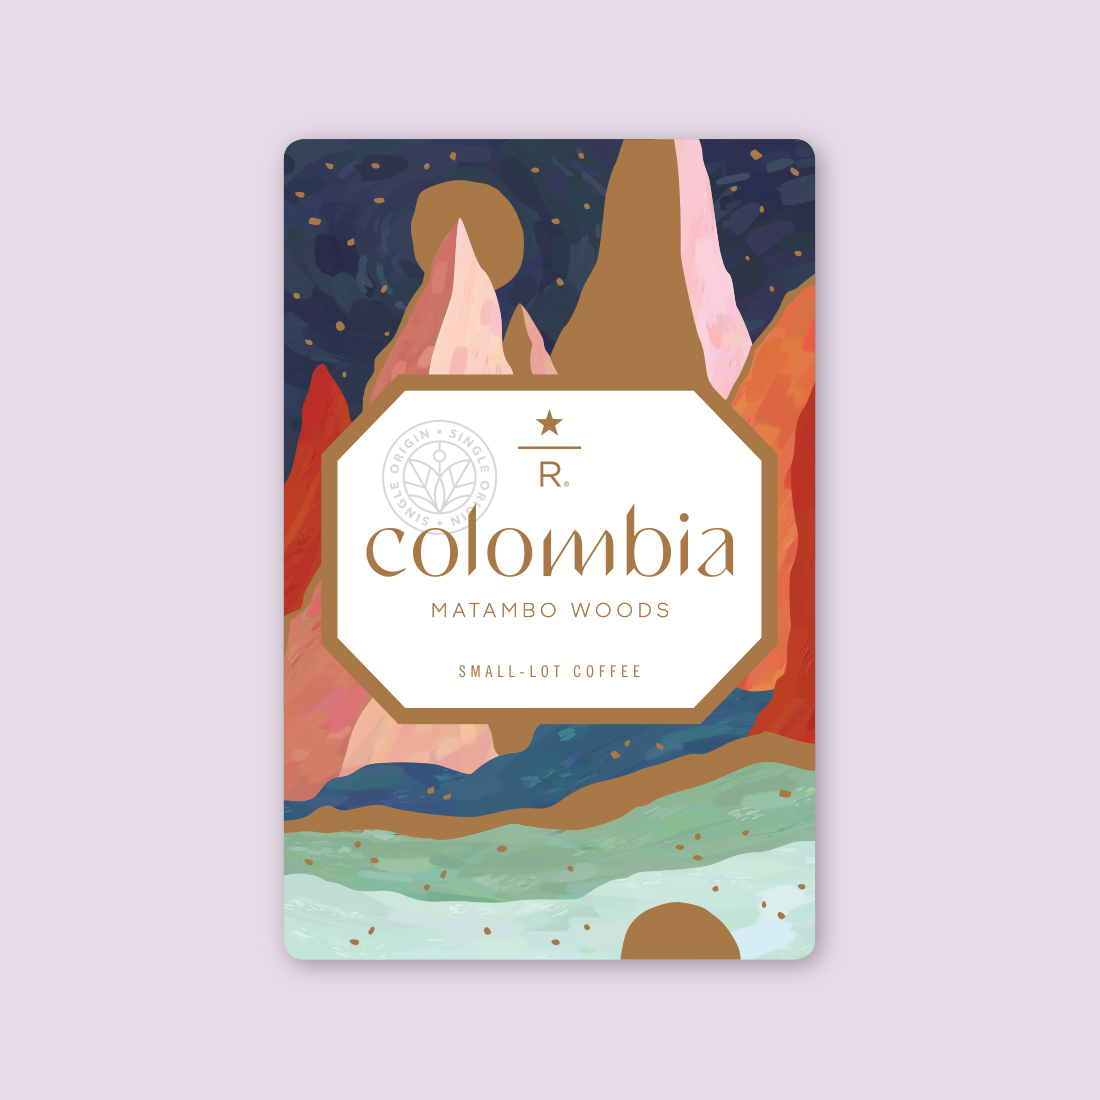 Coffee card illustration for COLOMBIA MATAMBO WOODS